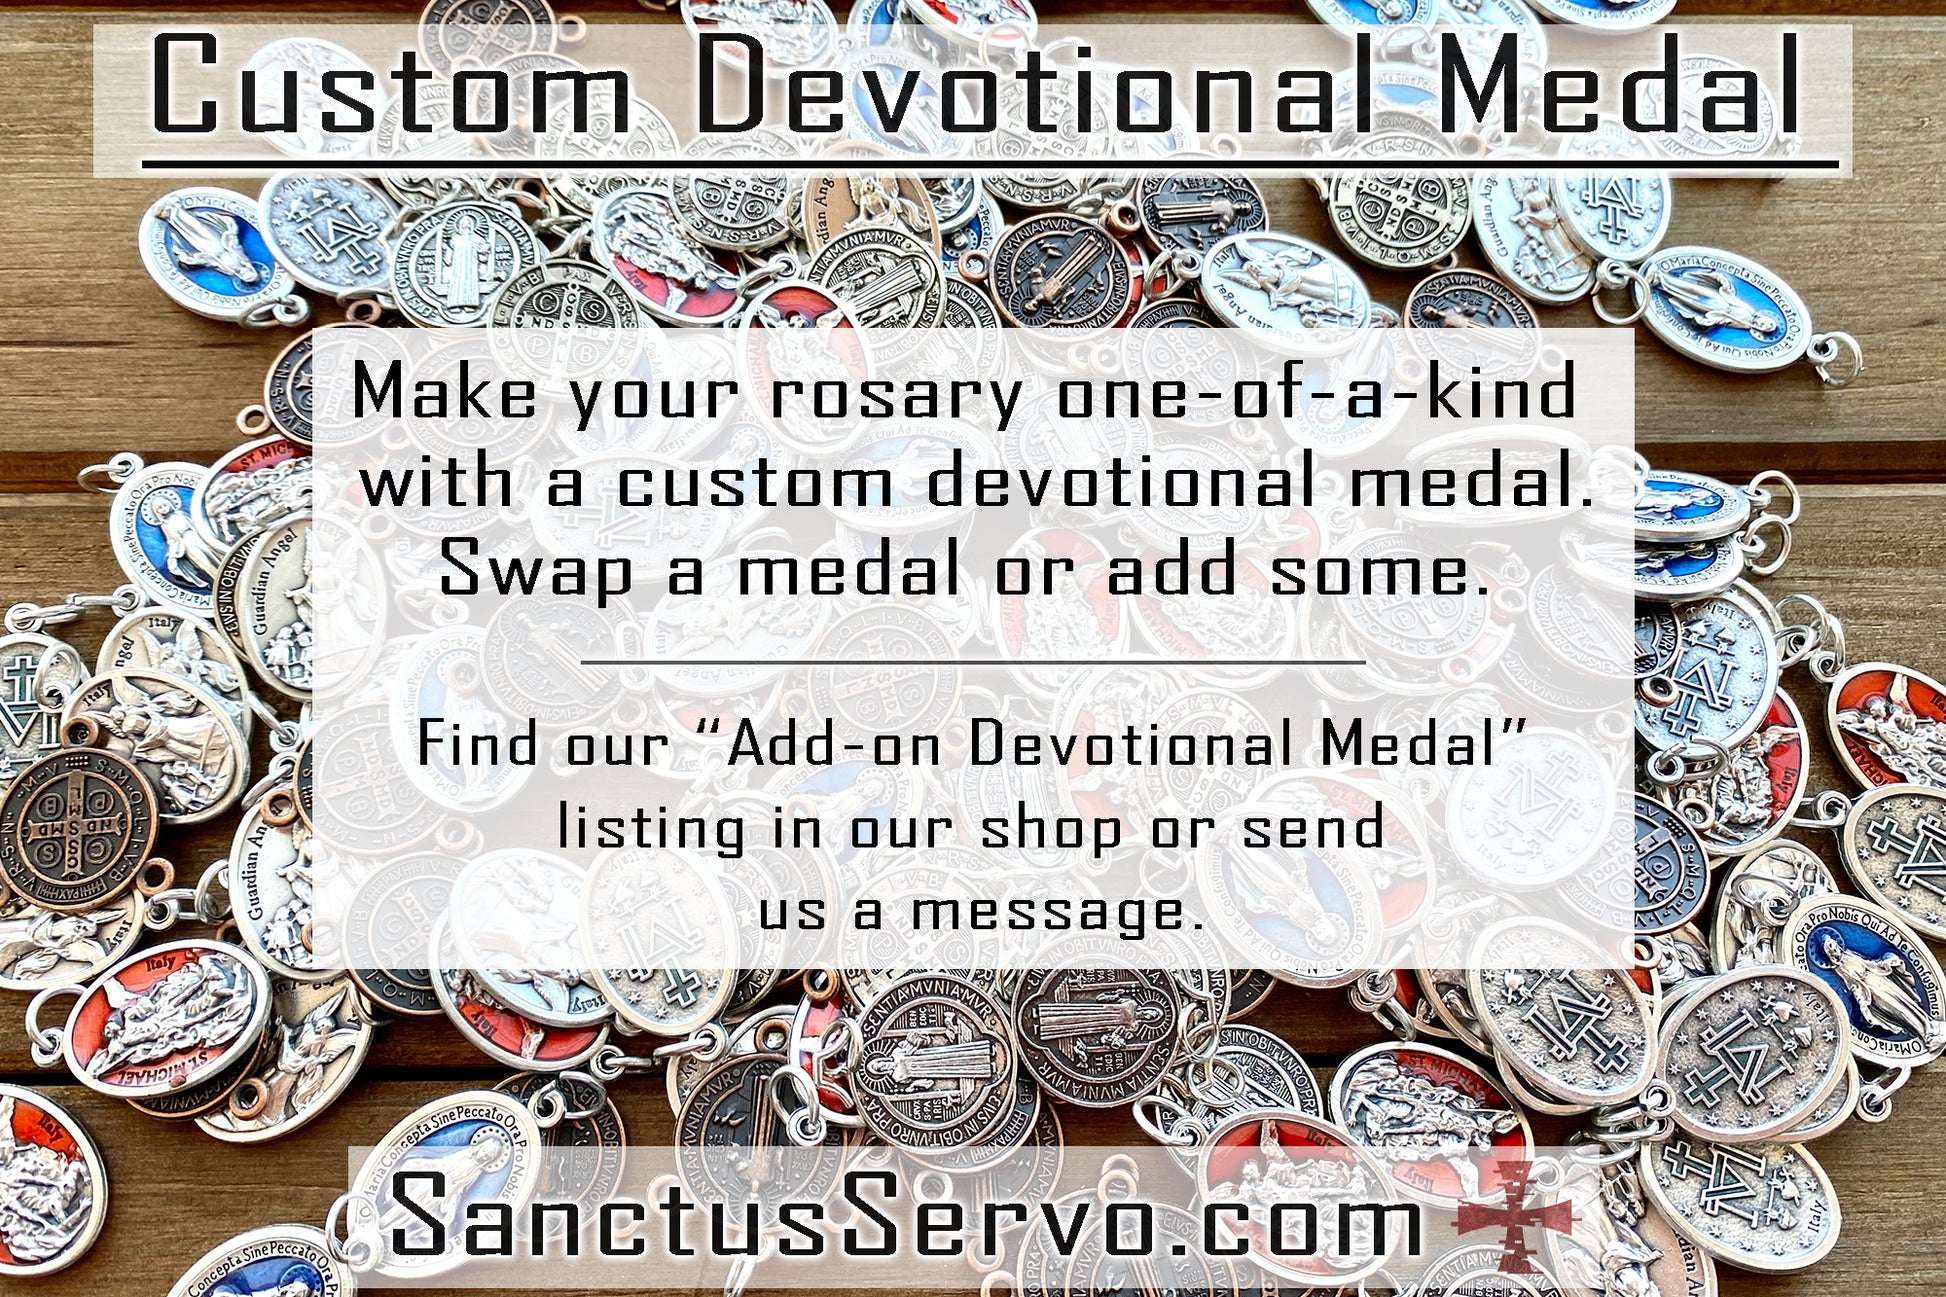 Upgrade your rosary with an add-on devotional medal from Sanctus Servo - Premium Catholic Patron Saint Medals for unbreakable spiritual power. Customize your rosary and deepen your faith with over 60 options to choose from, perfect for gifting or personal use!